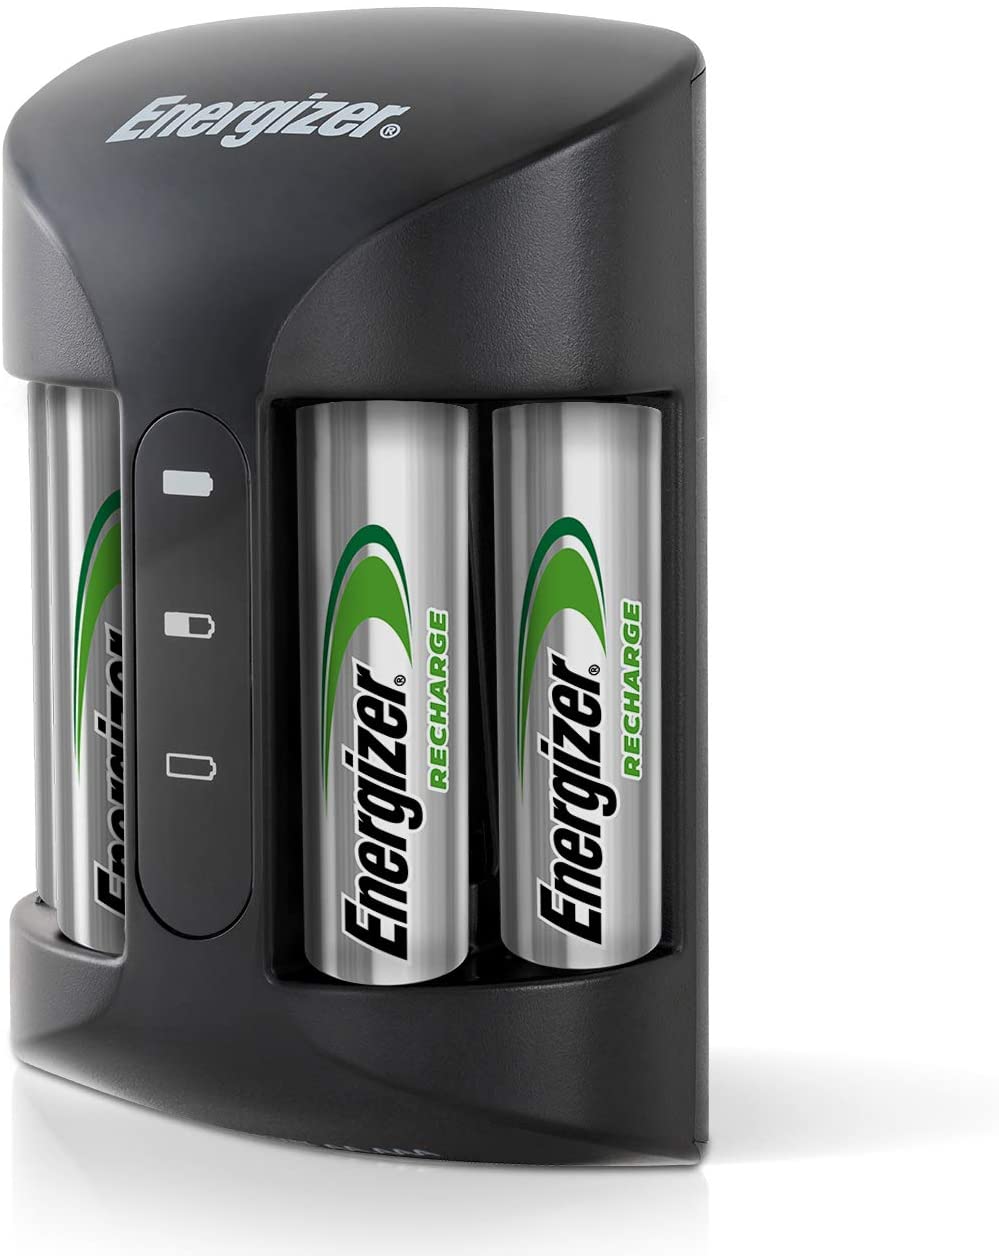 Canberra mavepine himmel Energizer Universal AA & AAA Battery Charger - Electric Socks